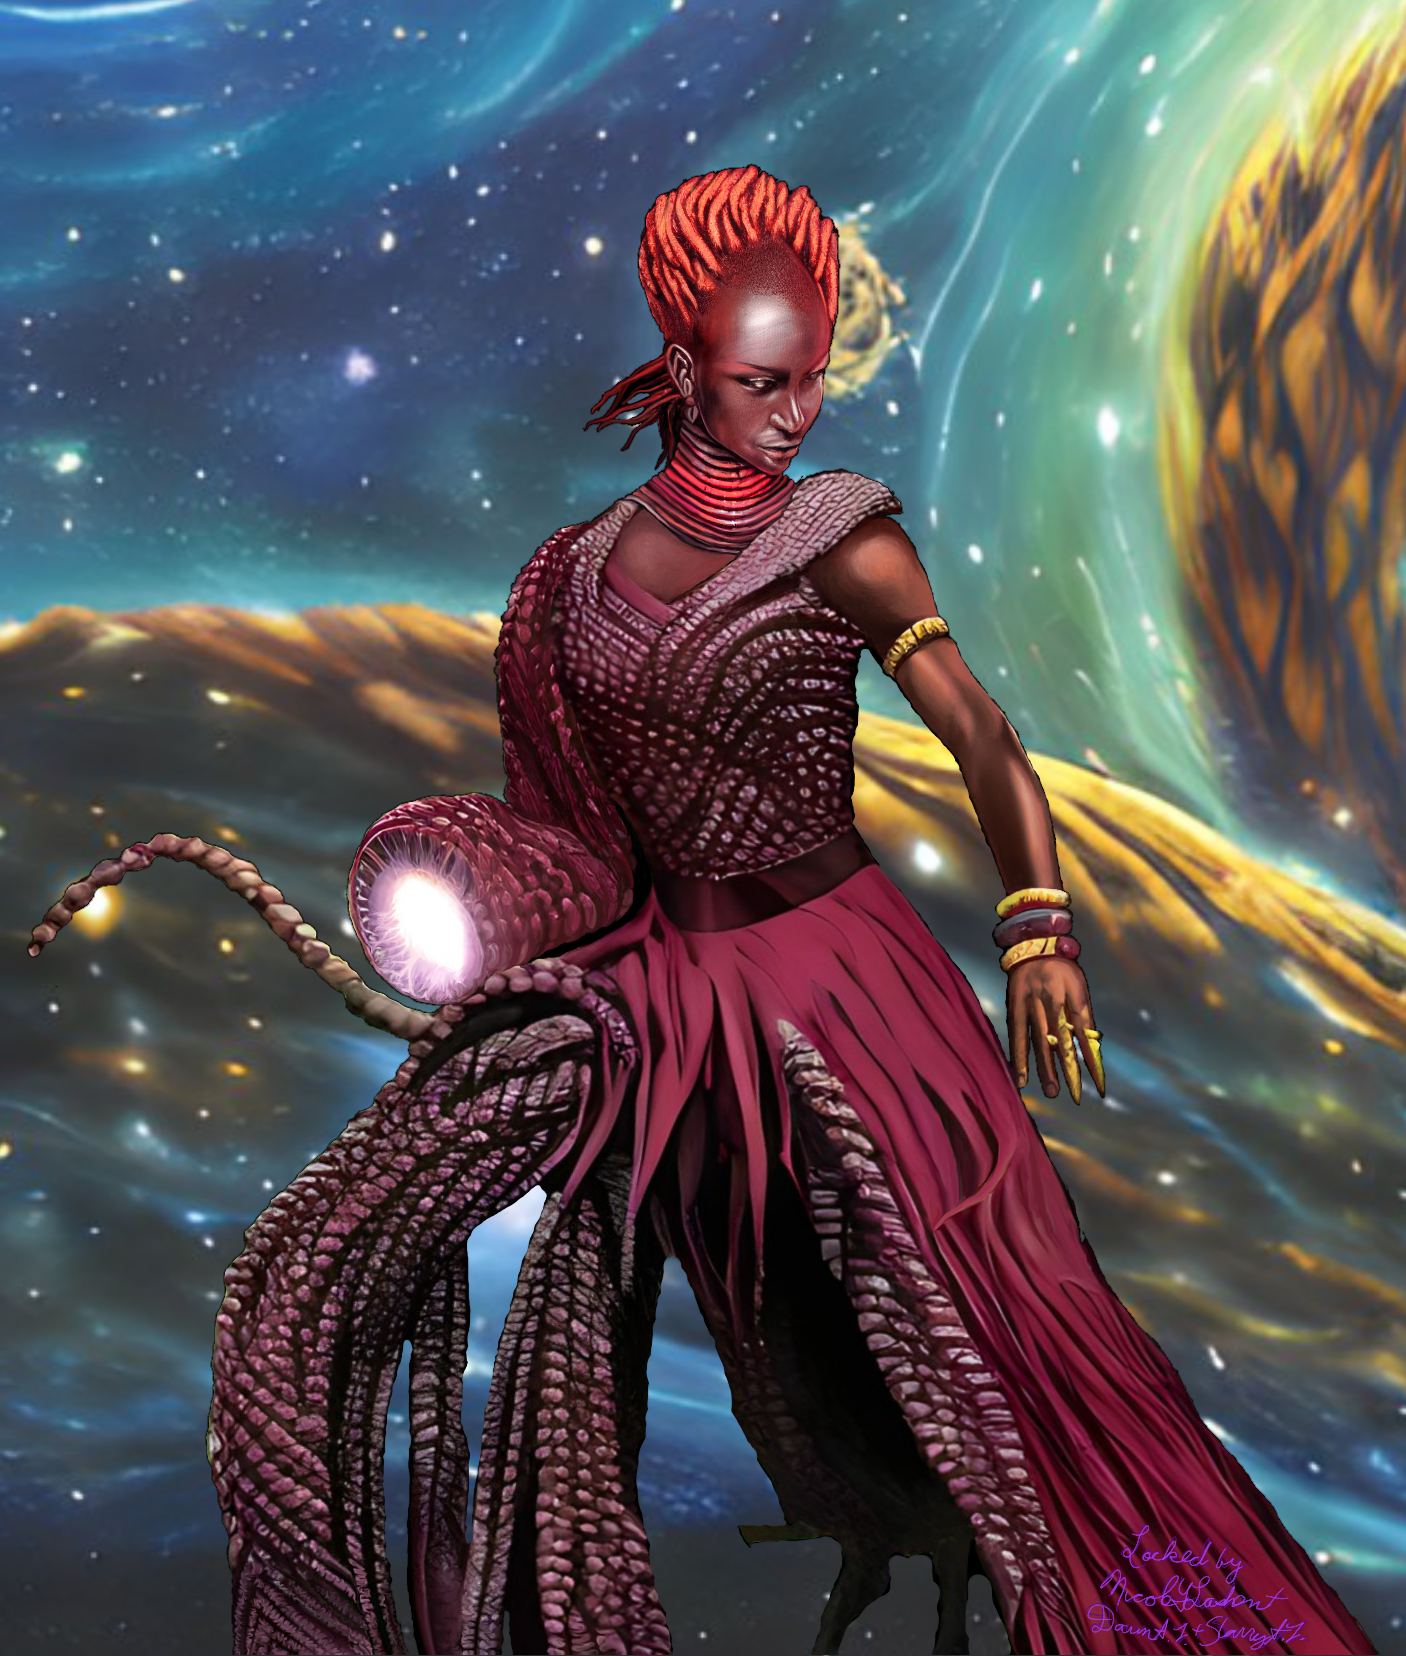 Locked, artwork with a woman with red dreadlocks, a biomechanical right arm and legs, standing in a spacey background.